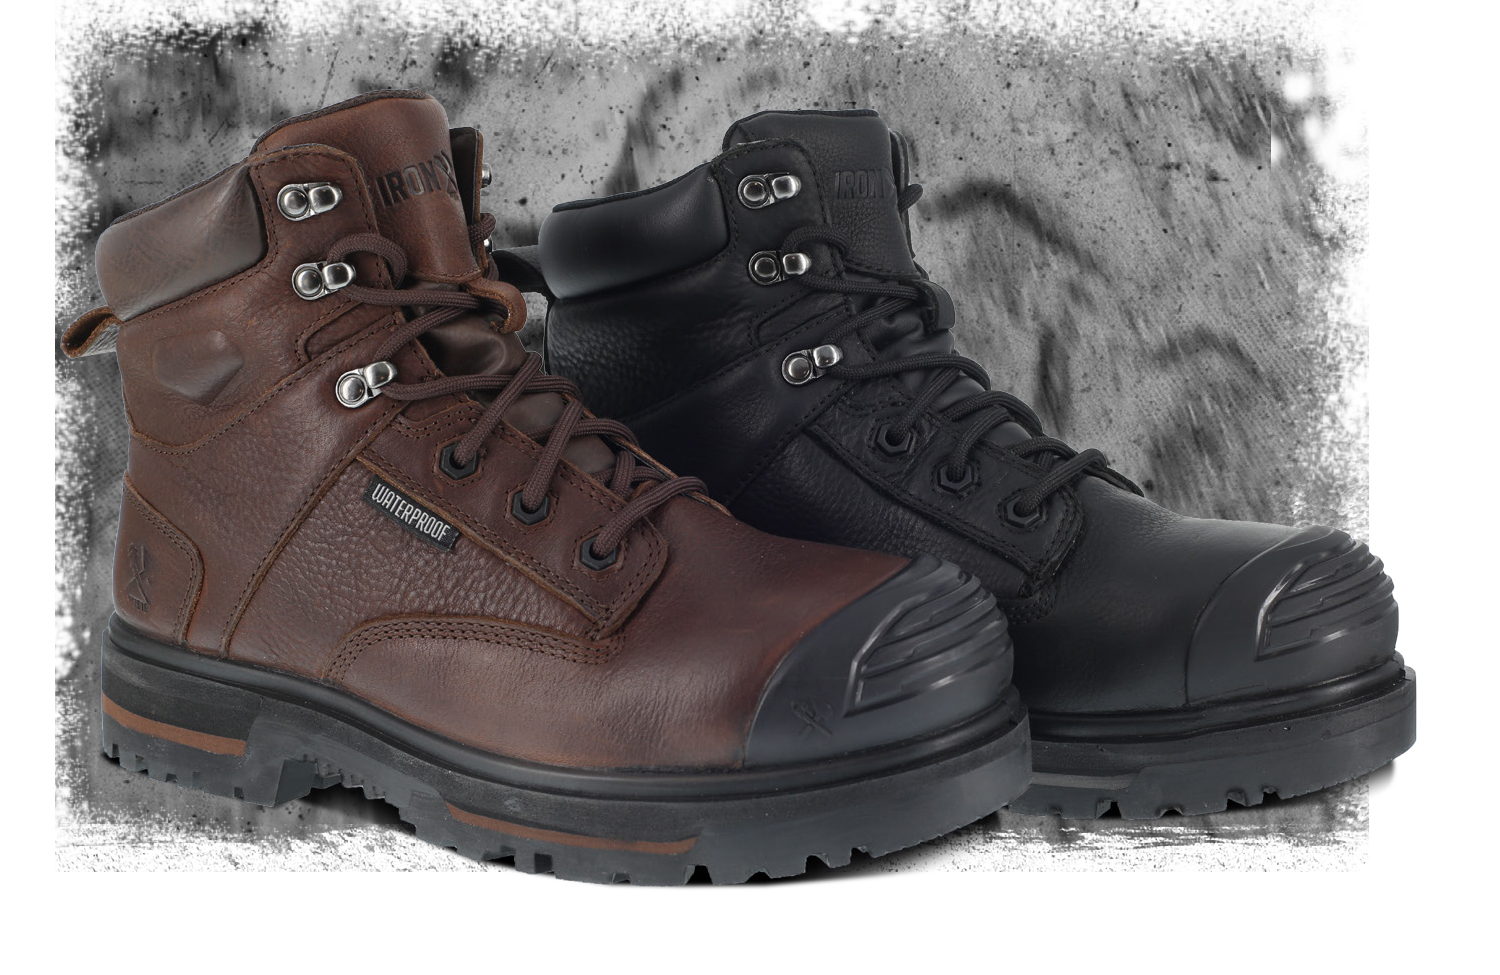 Trowler(TM) from Iron Age Footwear's "Old School Tough" line